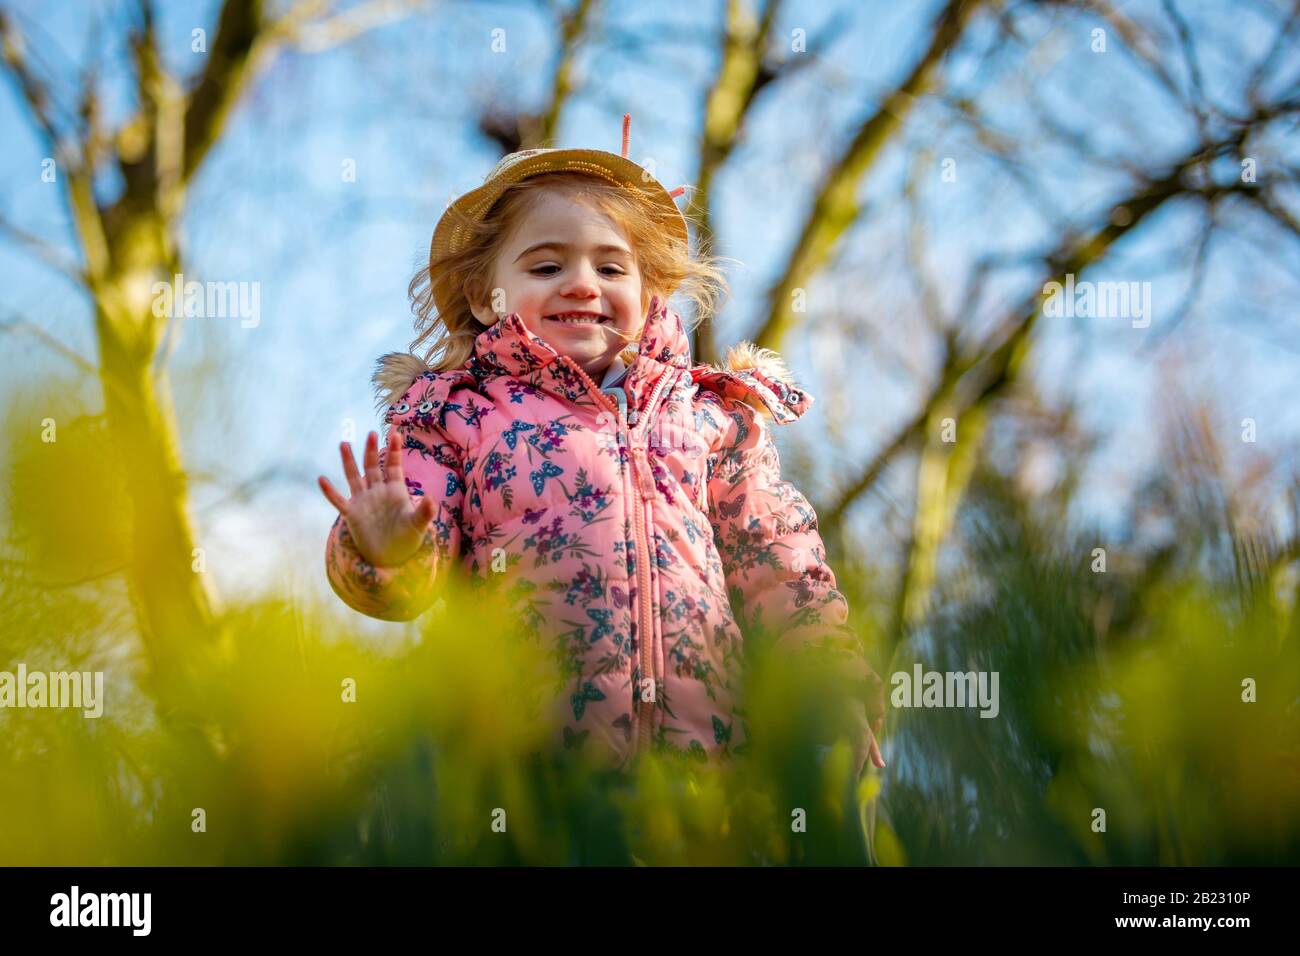 Two and a half year old girl playing outside among spring daffodils Stock Photo